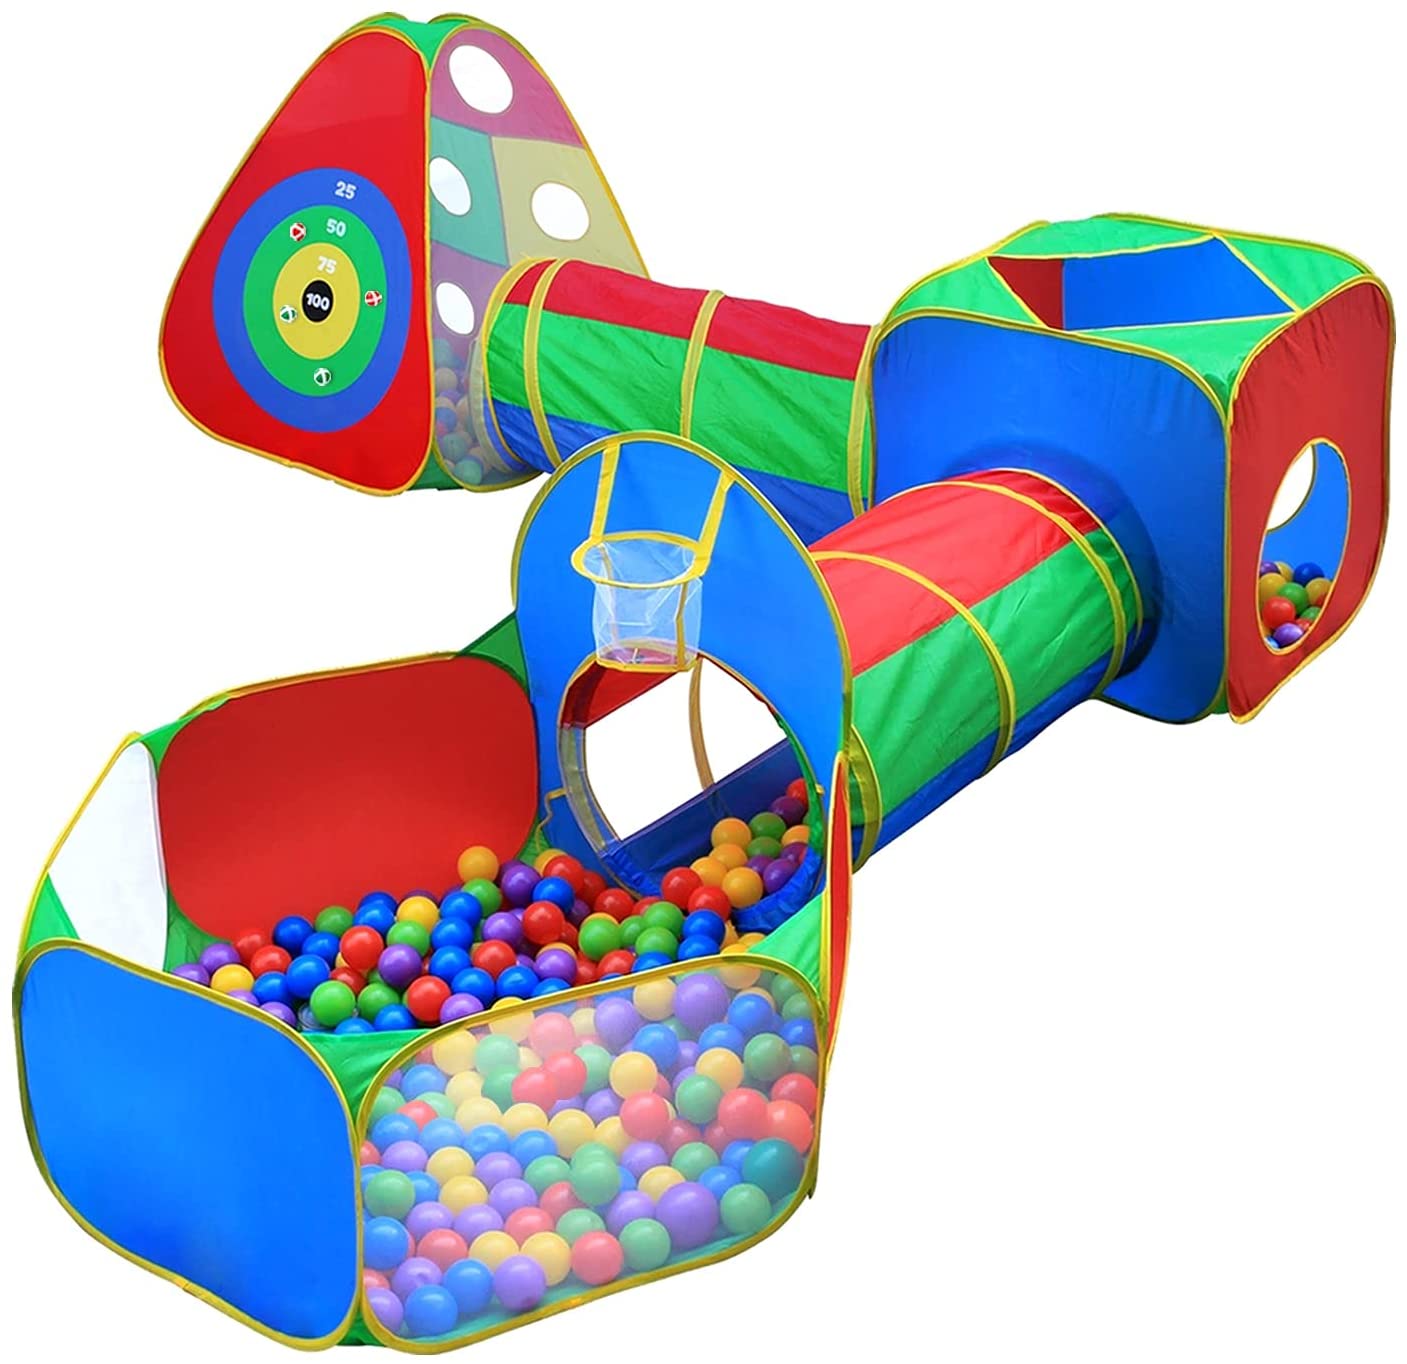 Hide N Side Ball Pit Tents & Mesh Tunnels Set For Children, 5-Piece